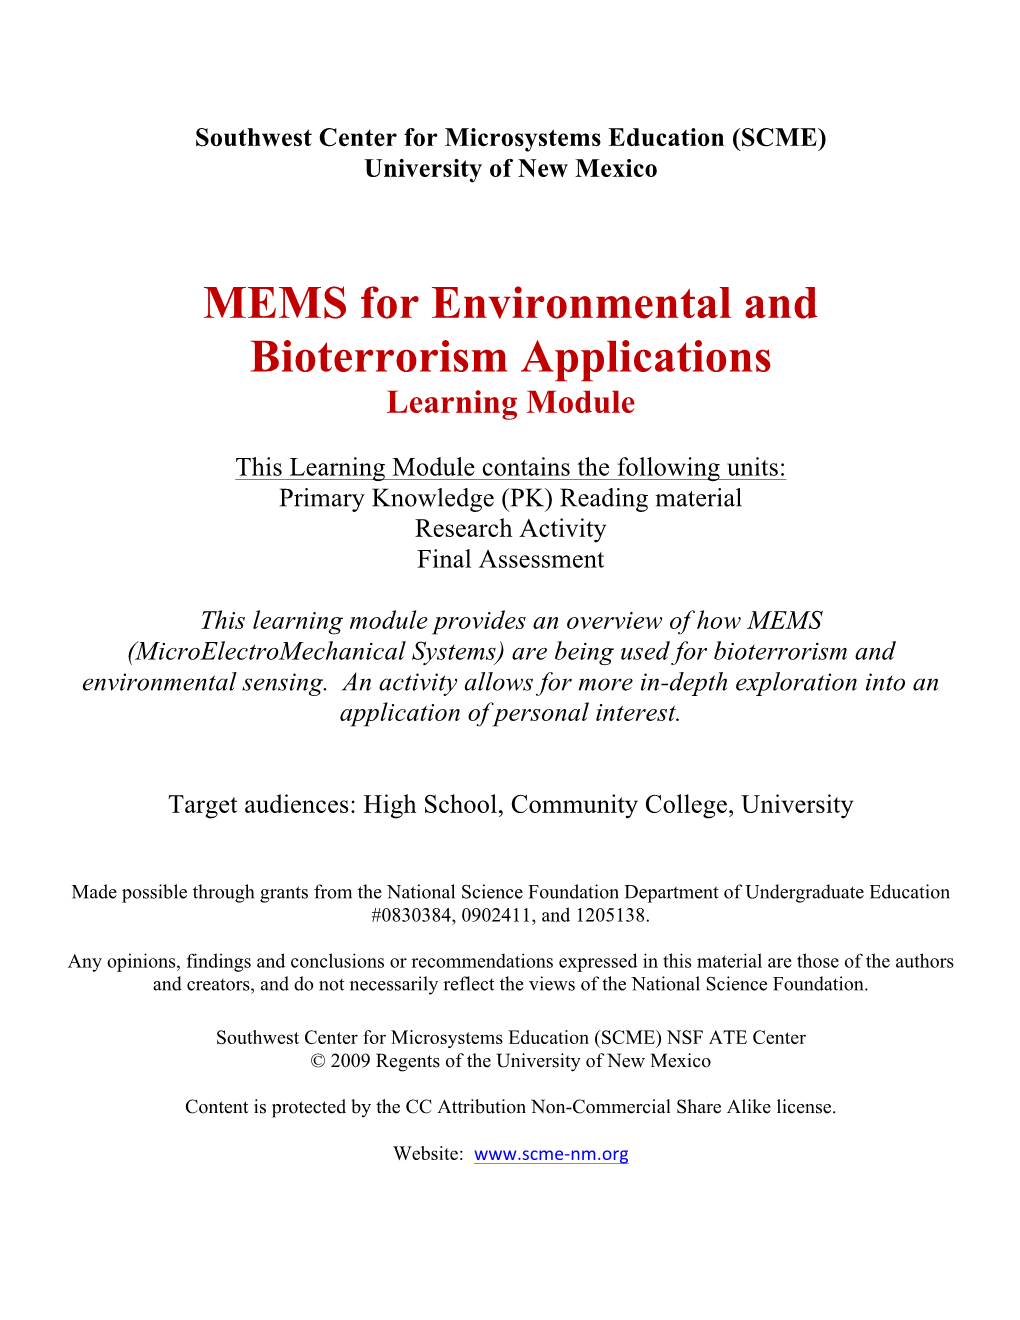 MEMS for Environmental and Bioterrorism Applications Learning Module